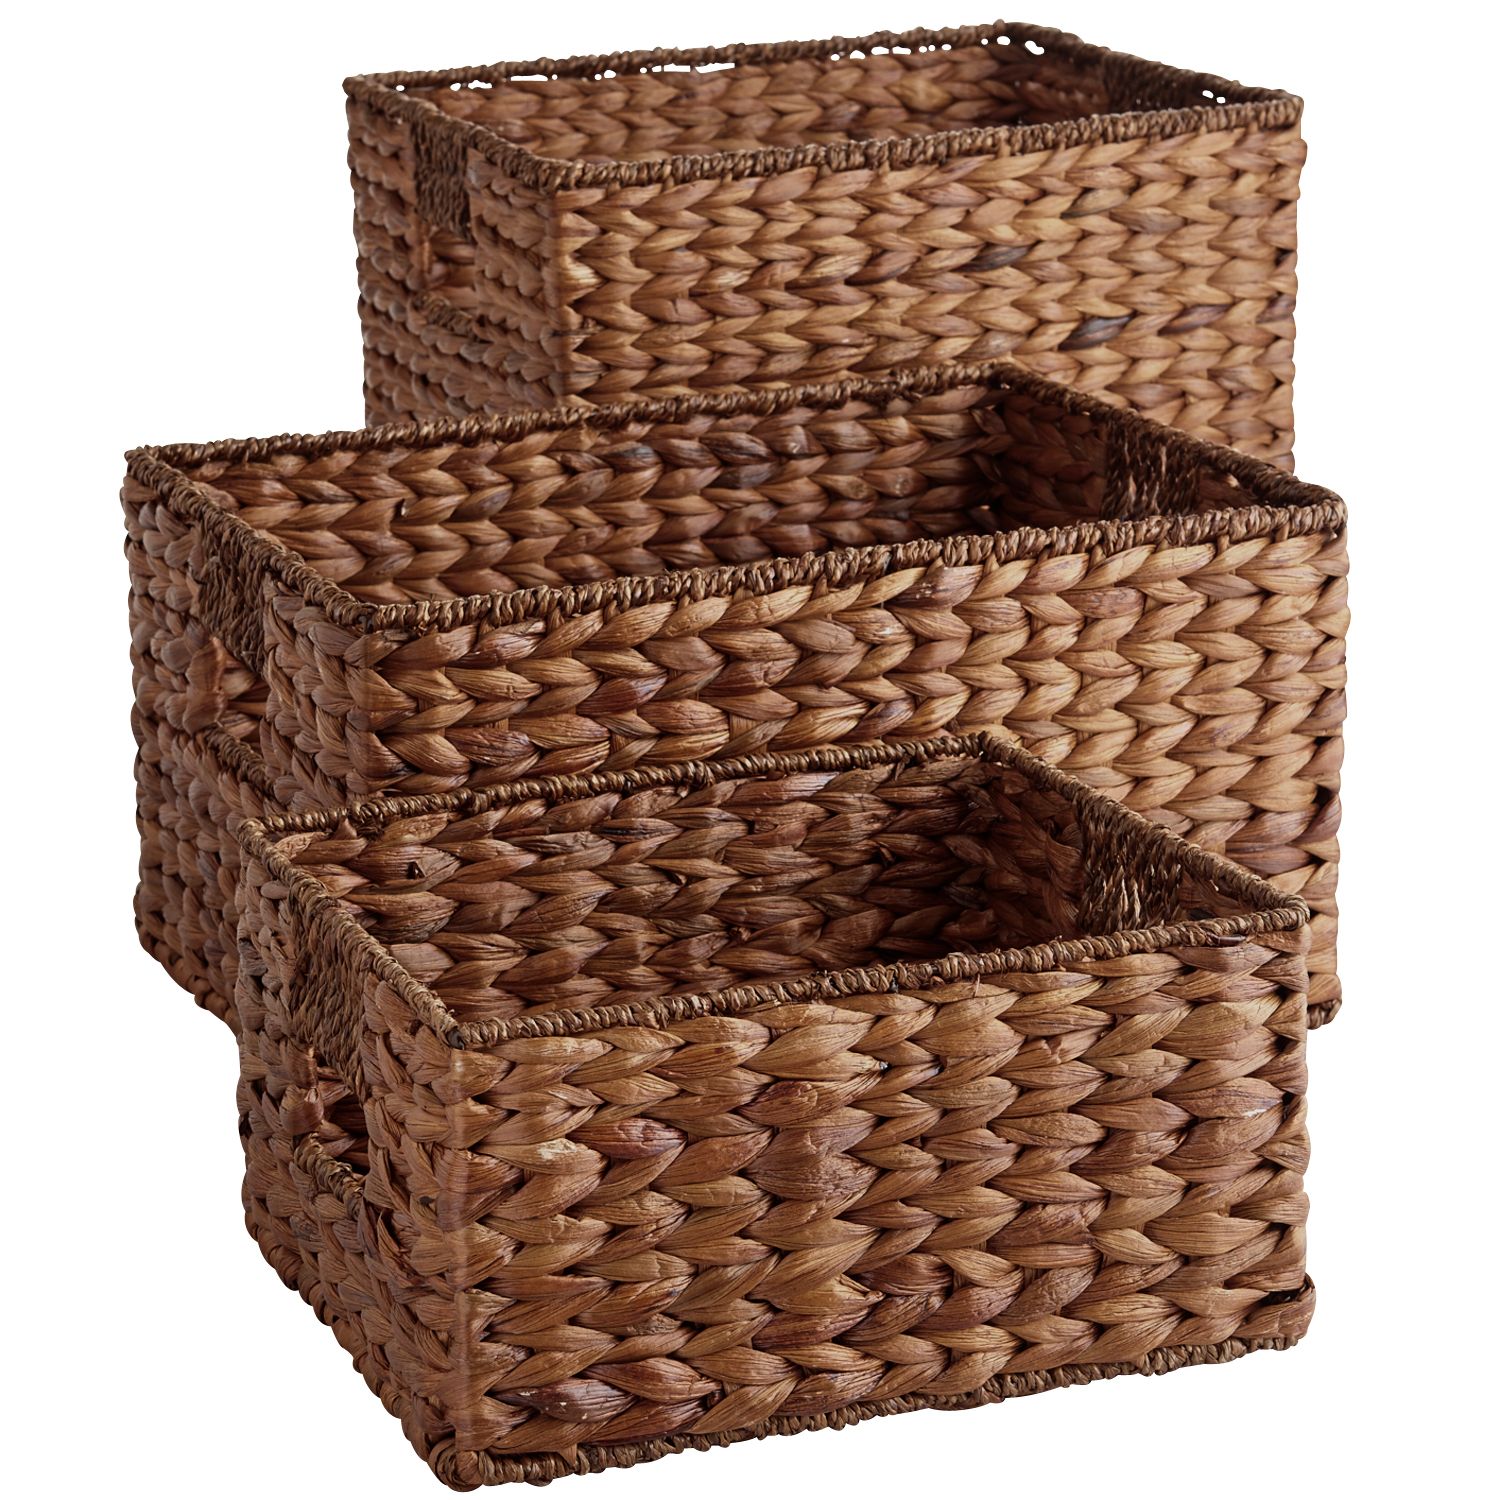 Wicker storage baskets for shelves for
rooms